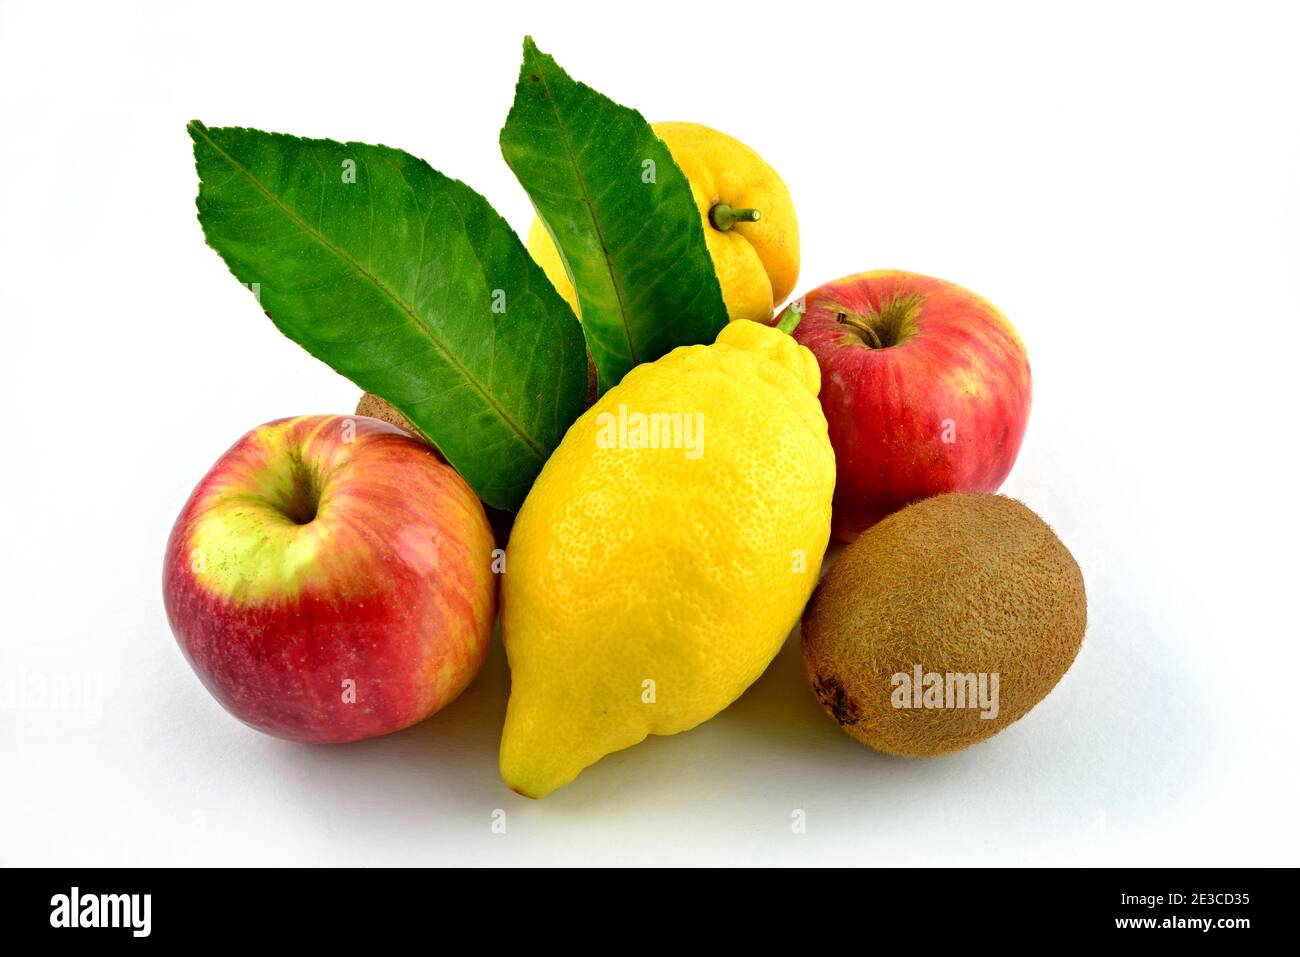 Mix of fruits, two yellow lemons, two red apples, one brown kiwi. Green lemon leaves. Stock Photo